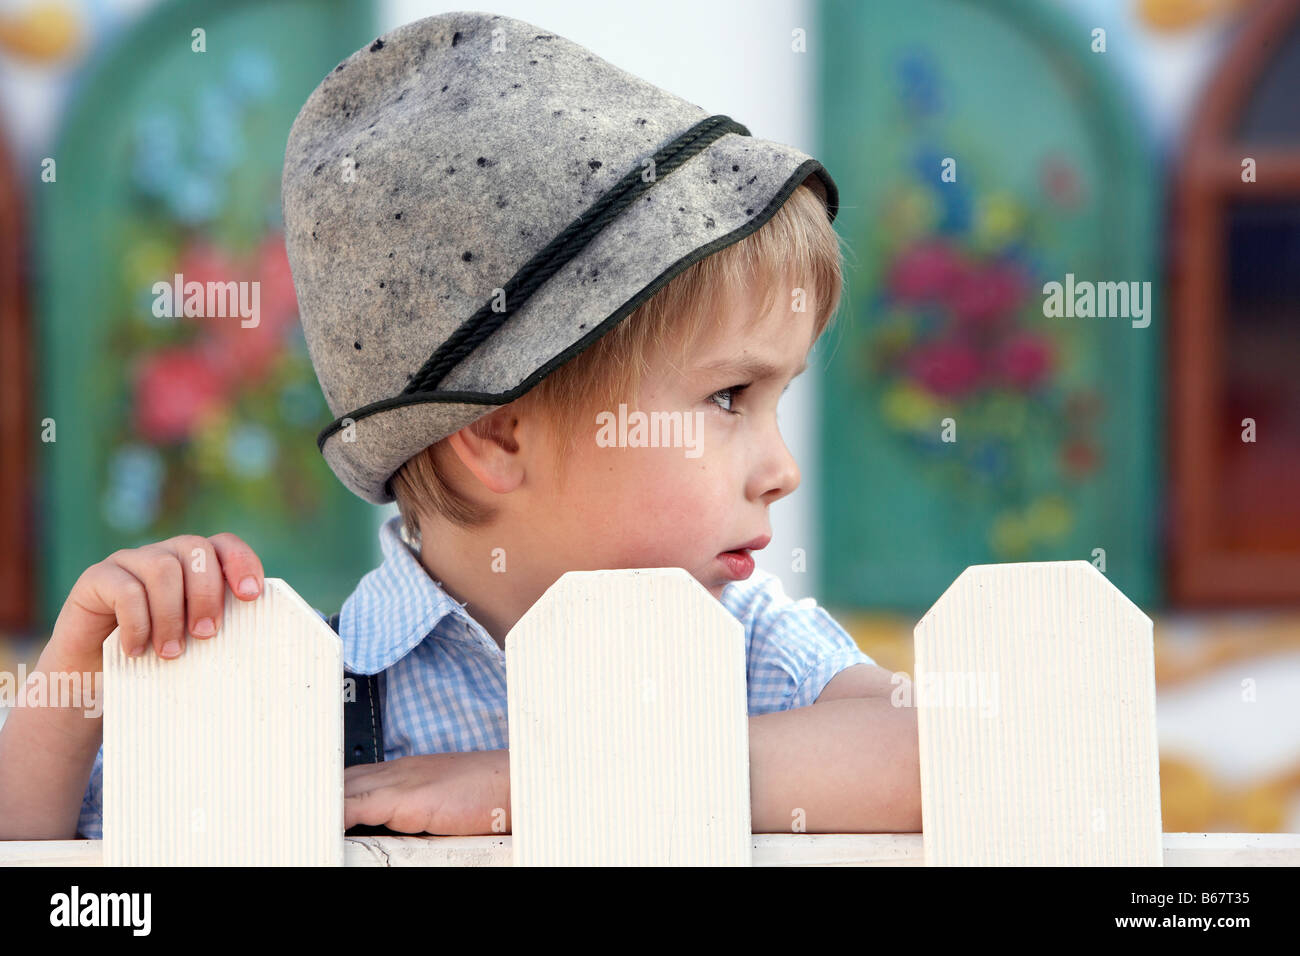 Boy (3-4 years) standing behind a fence Stock Photo